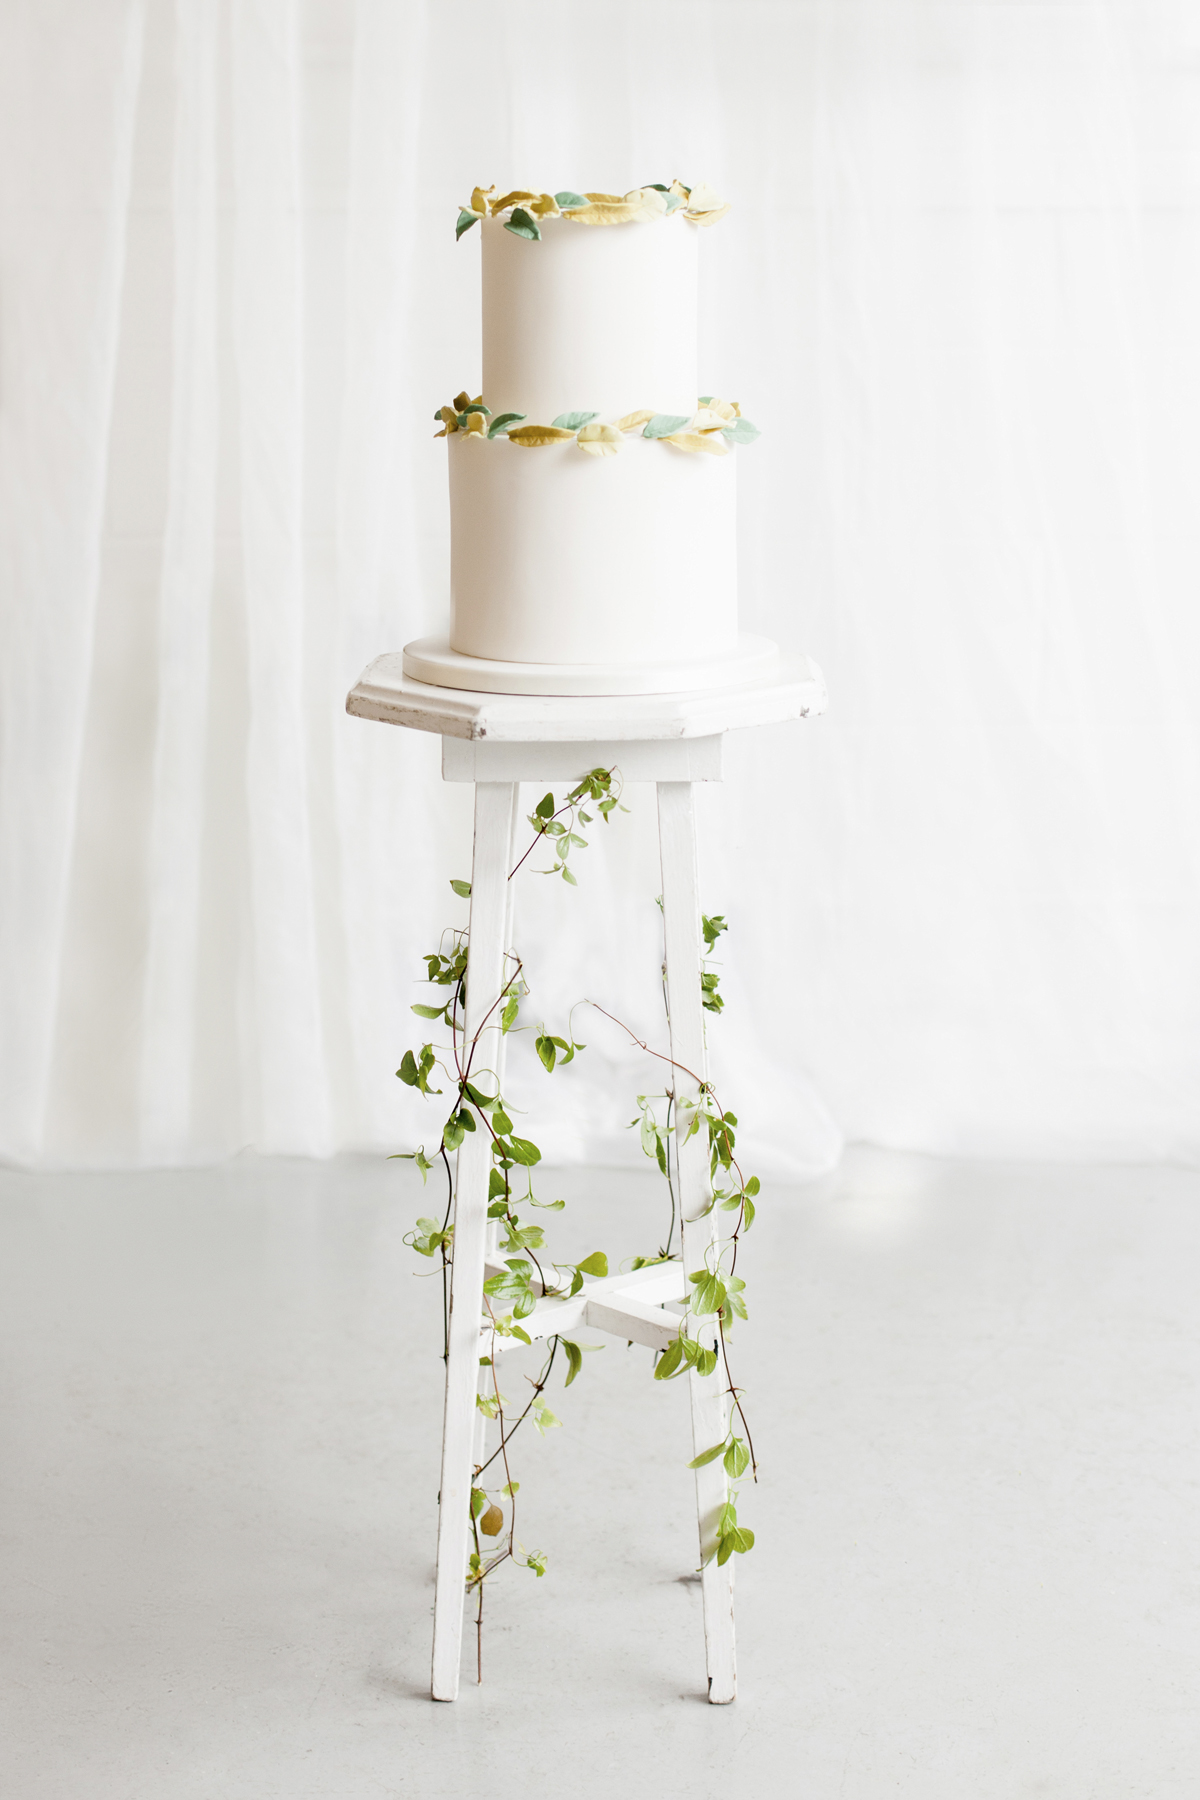 Wedding Cake with Leaf Accents